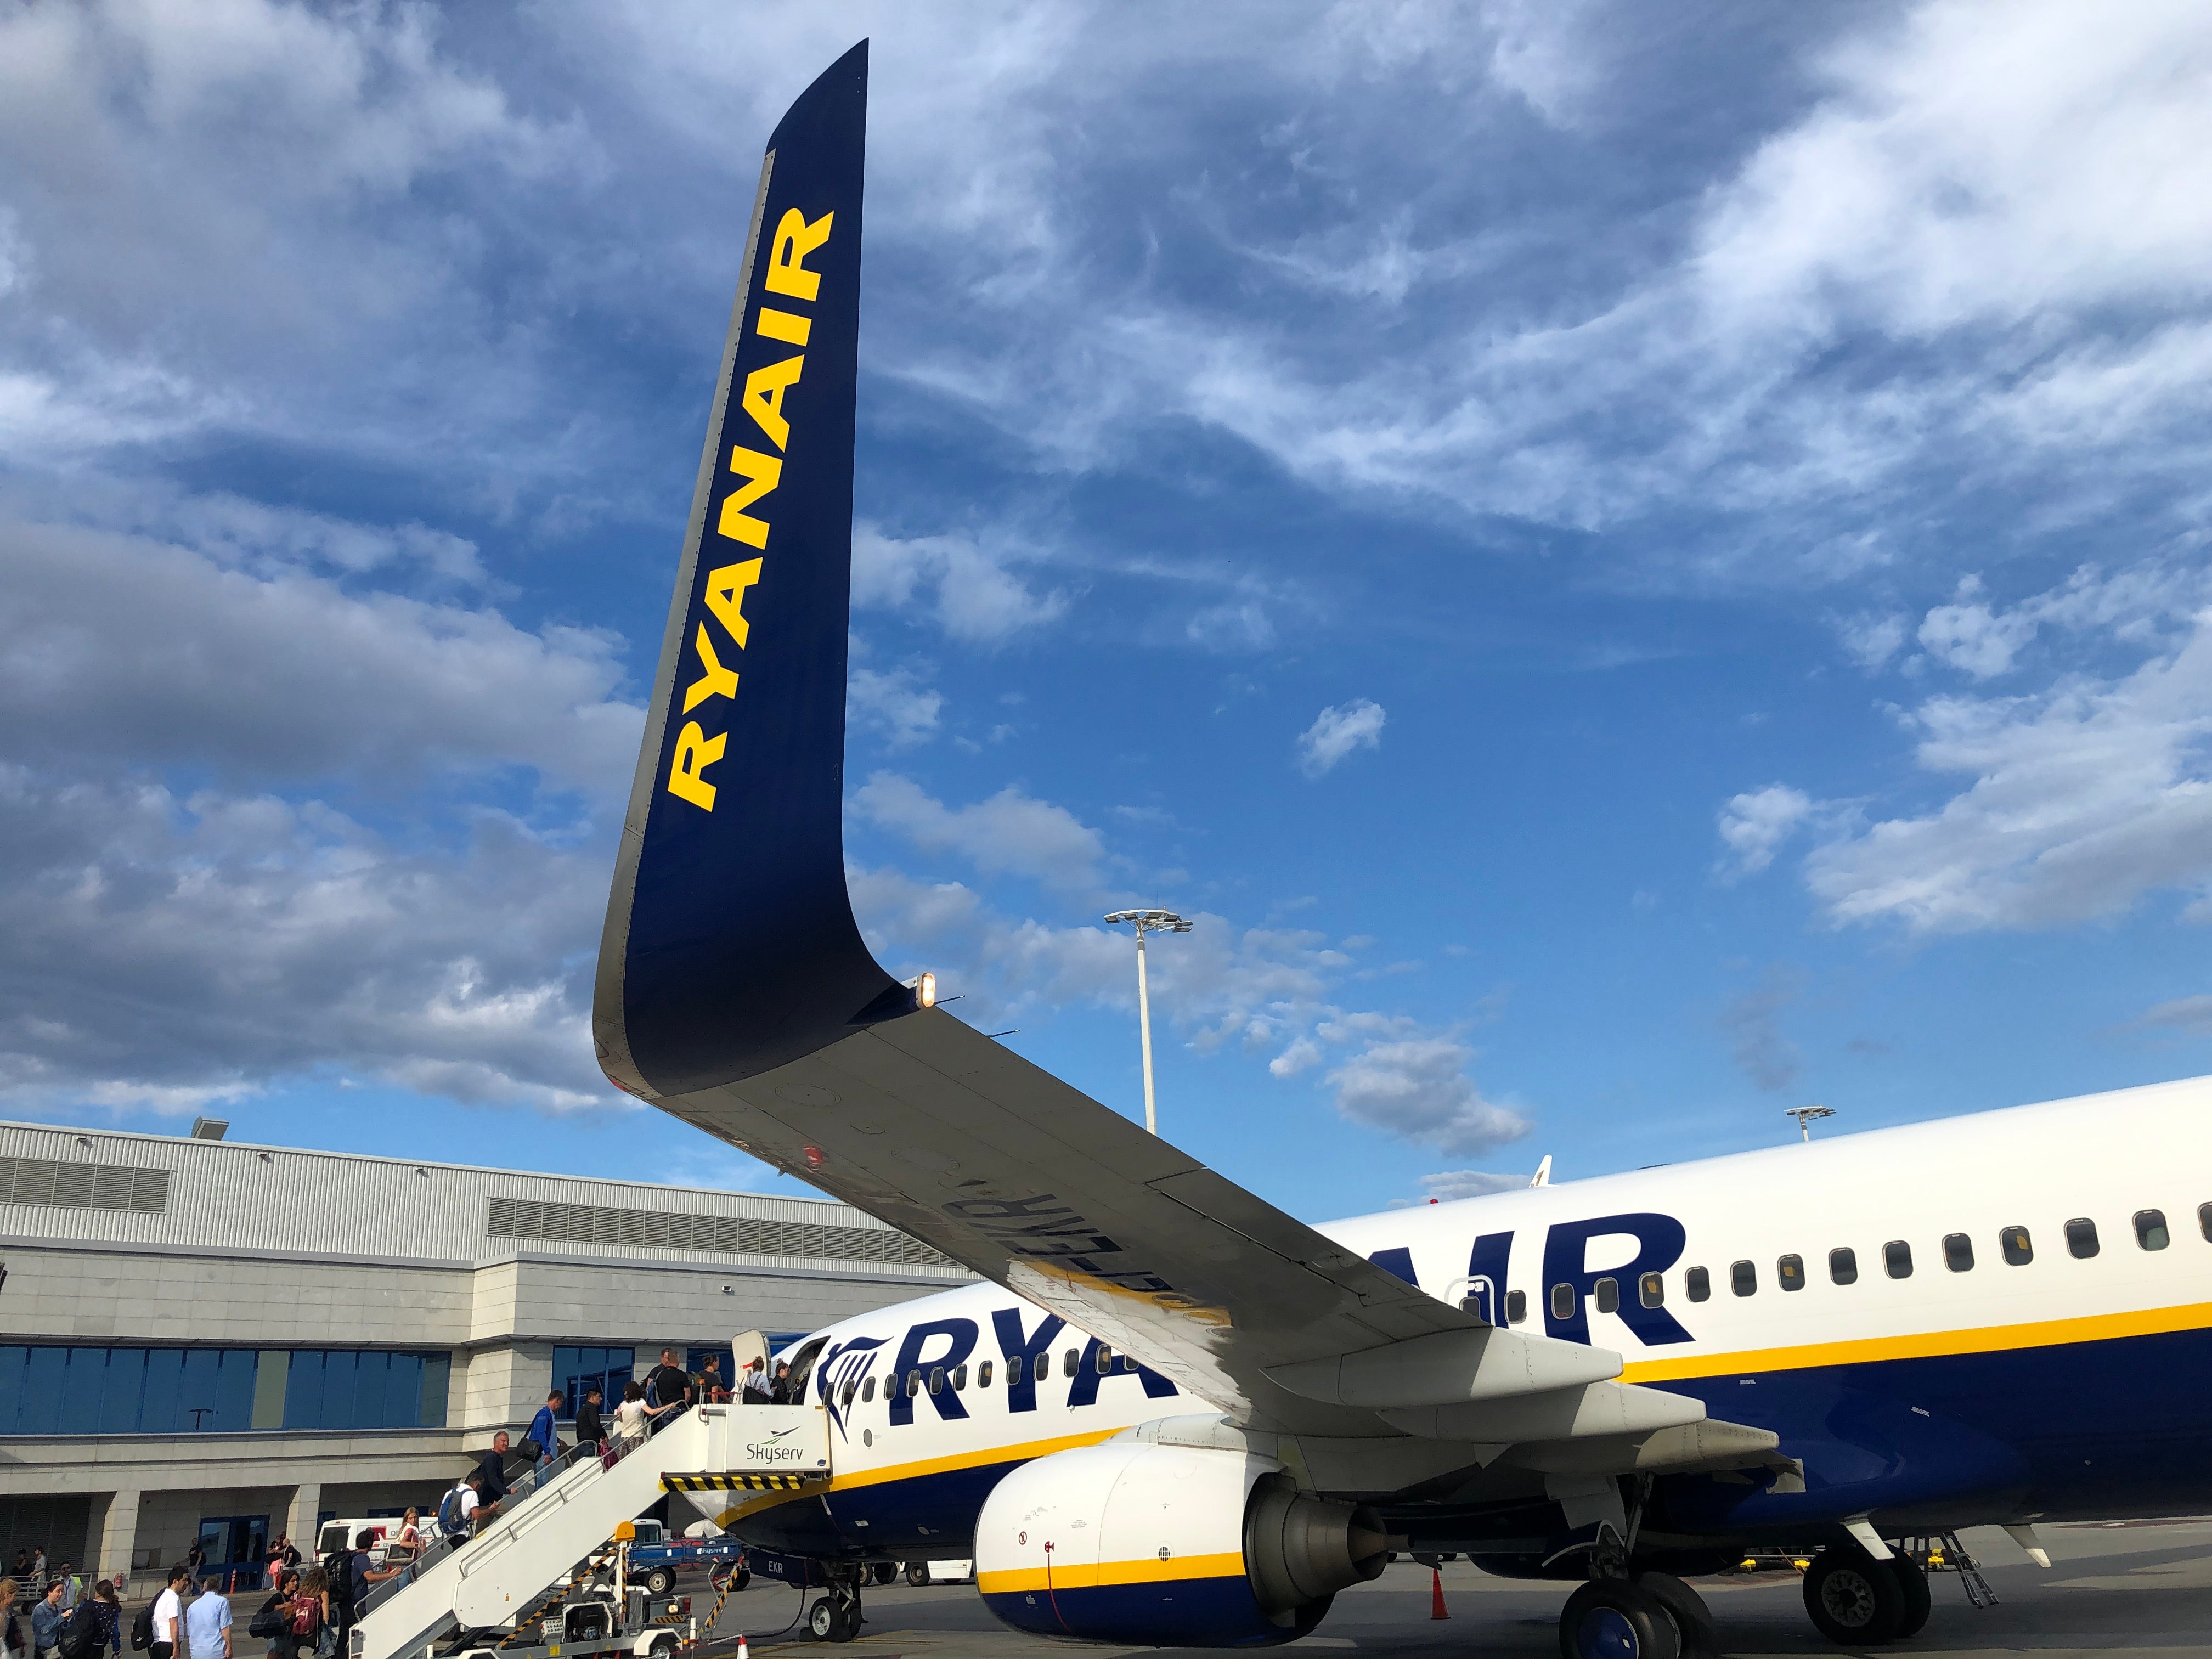 Greek myth? No, Ryanair will fly passengers from London to Athens airport, pictured, for £14.99